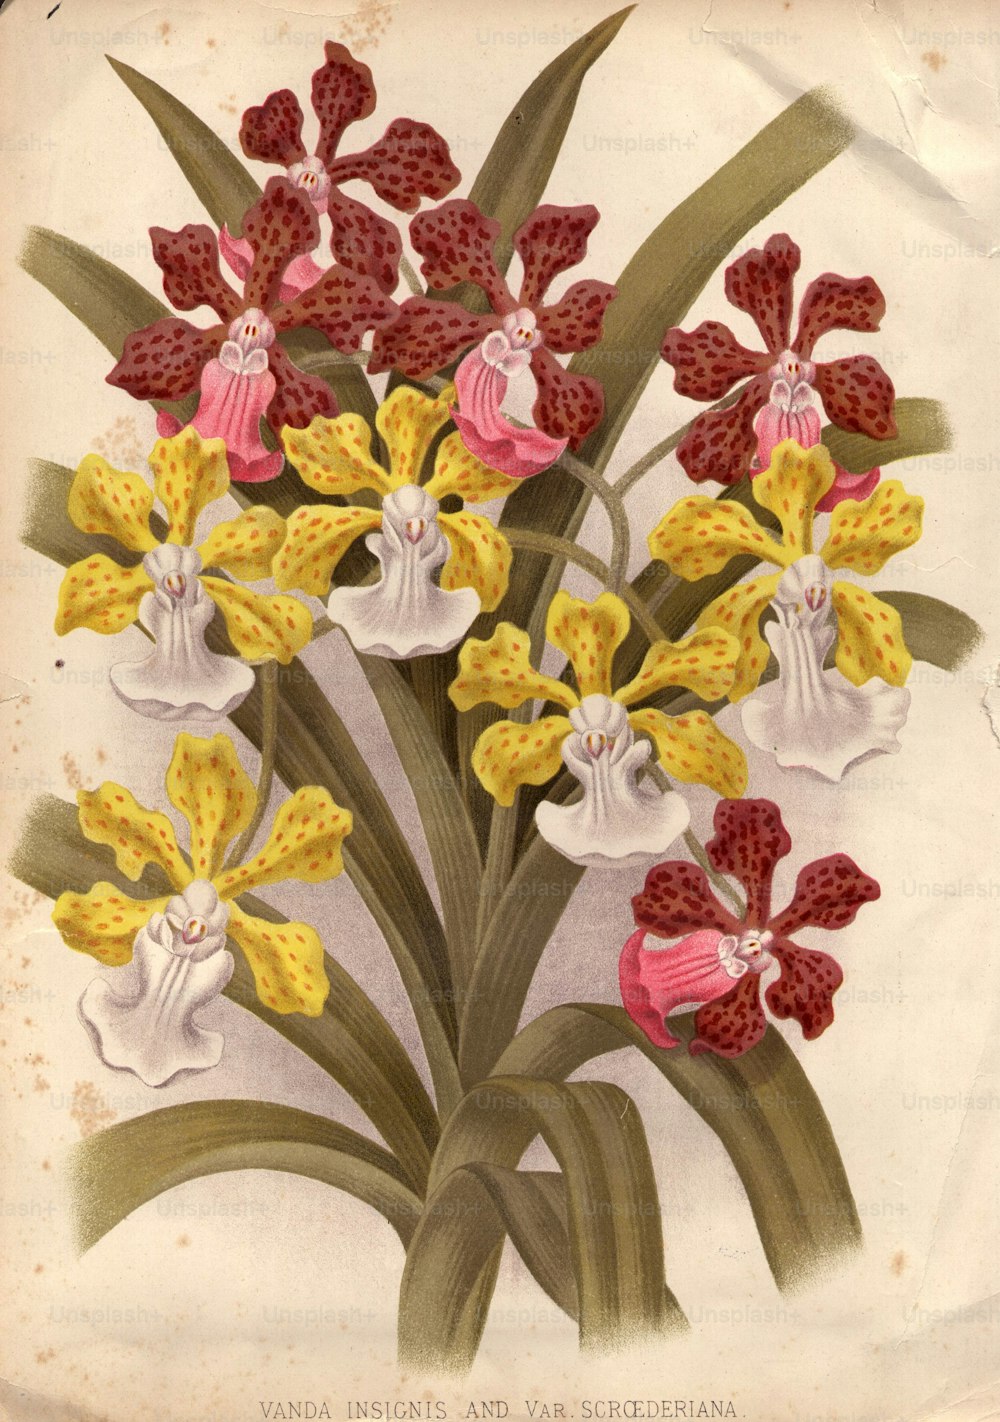 circa 1800:  Two orchids, vanda insignis and var scroederiana.  (Photo by Edward Gooch Collection/Getty Images)